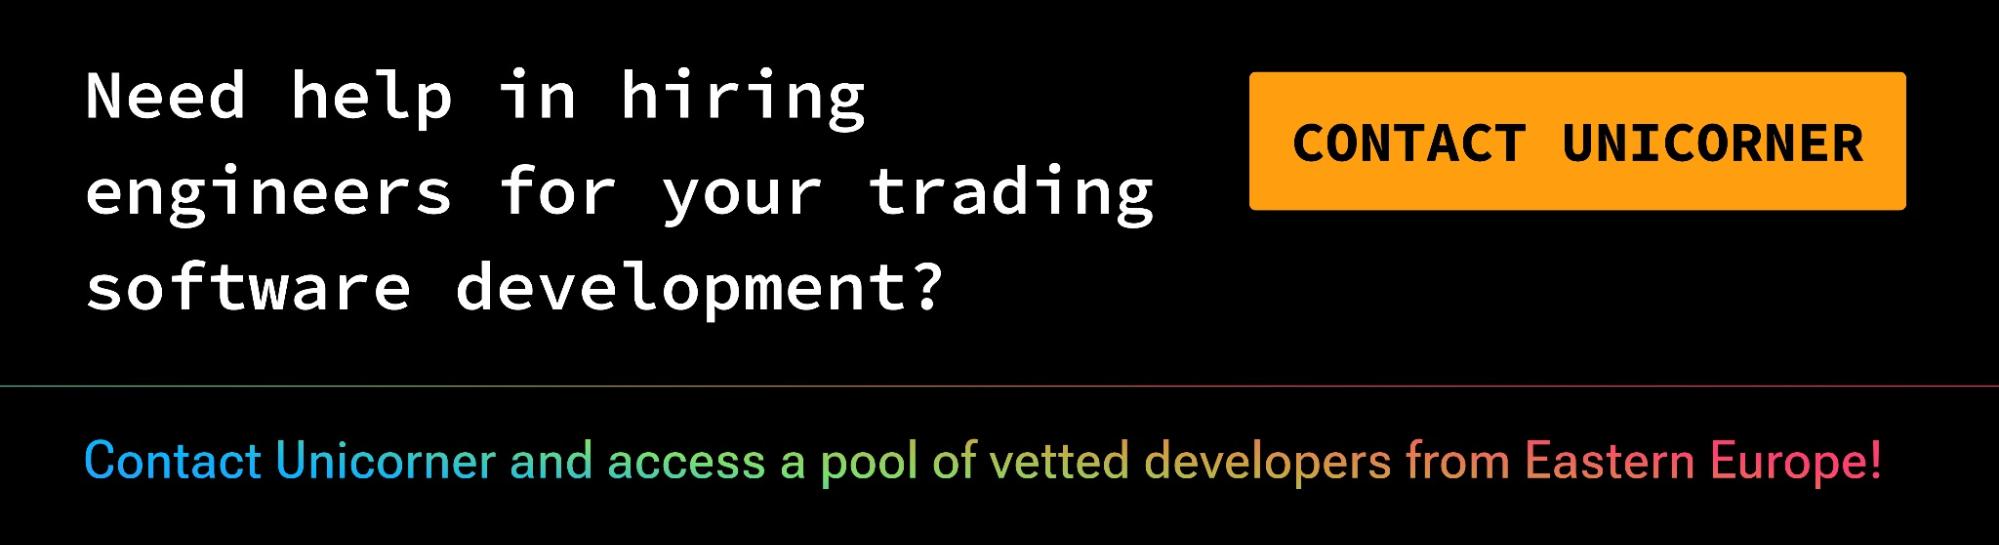 Need help in hiring engineers for your trading software development? Contact Unicorner and access a pool of vetted developers from Eastern Europe!